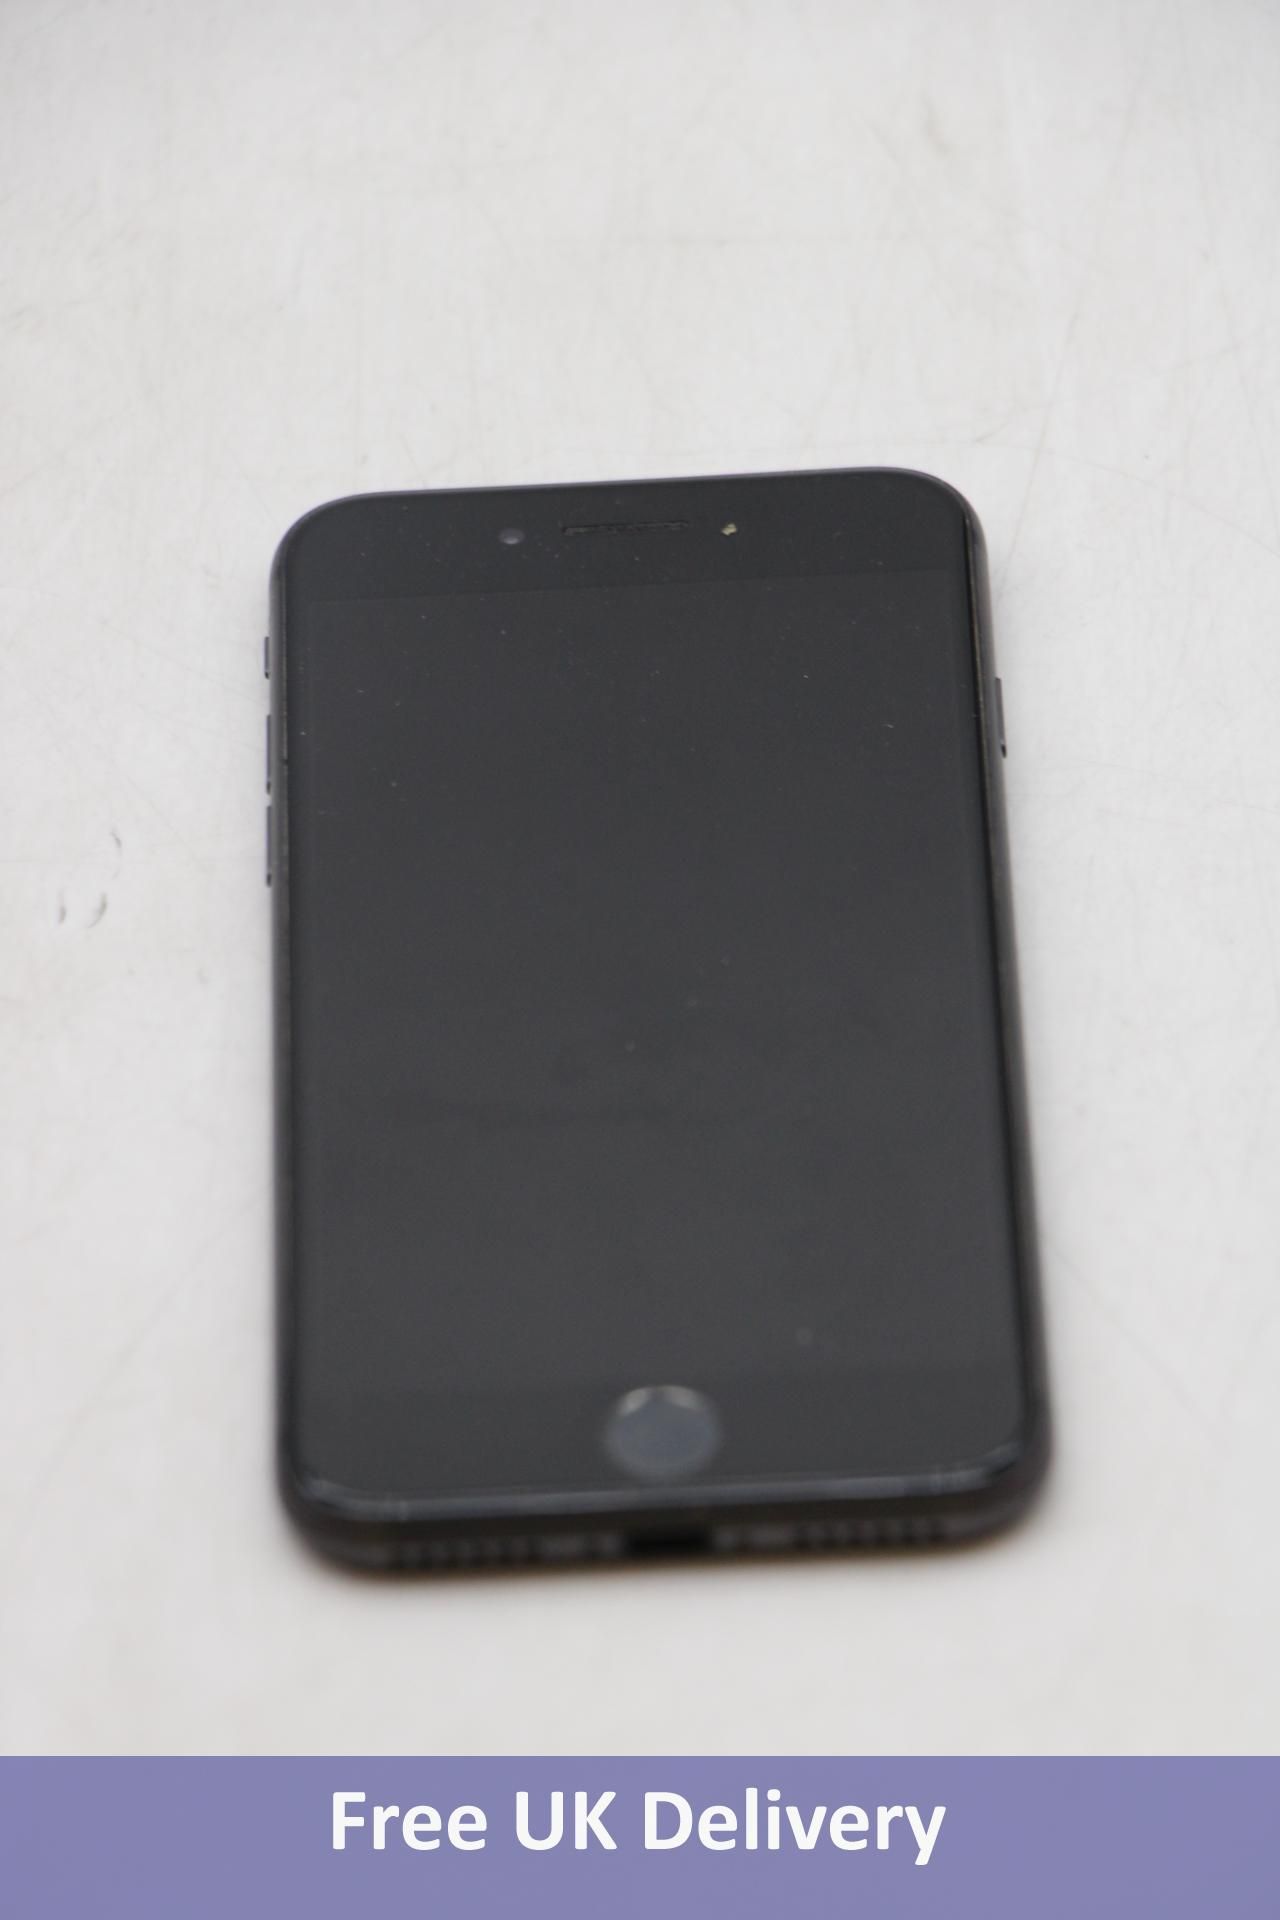 Apple iPhone 8, 256GB, Space Grey. Used, no box or accessories. Checkmend clear, Ref. CM19887074-54B